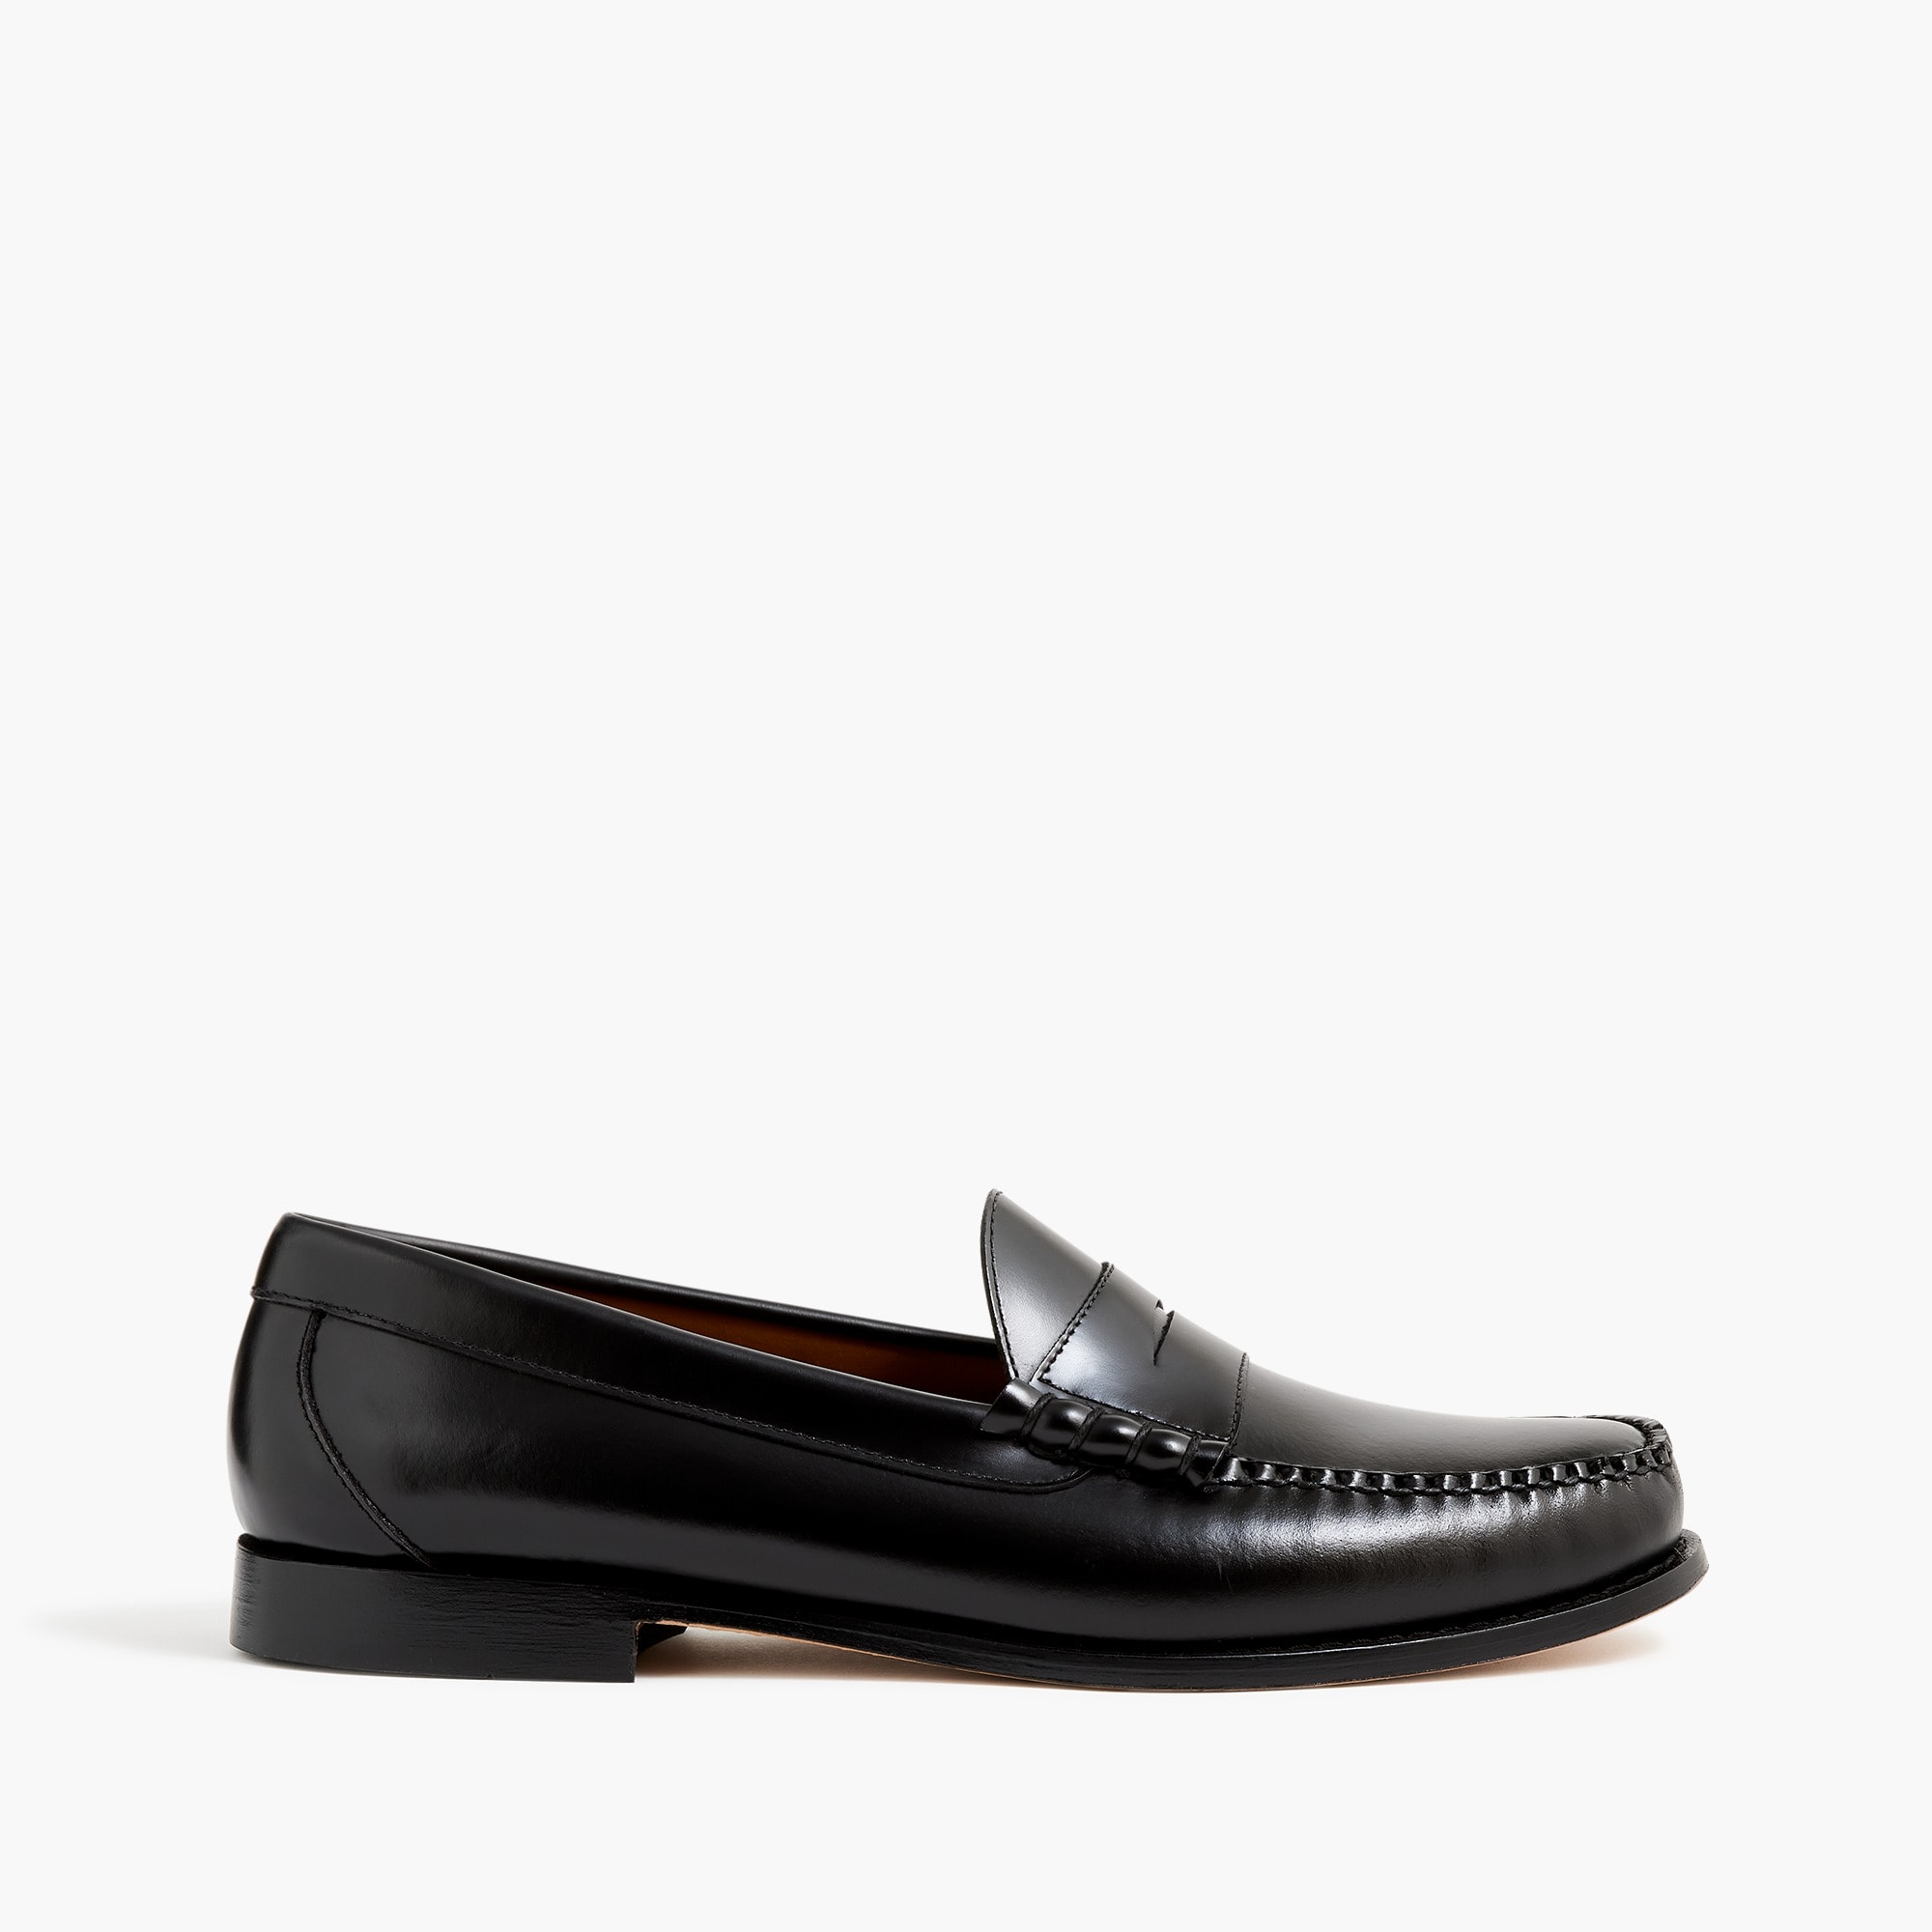 Penny loafers